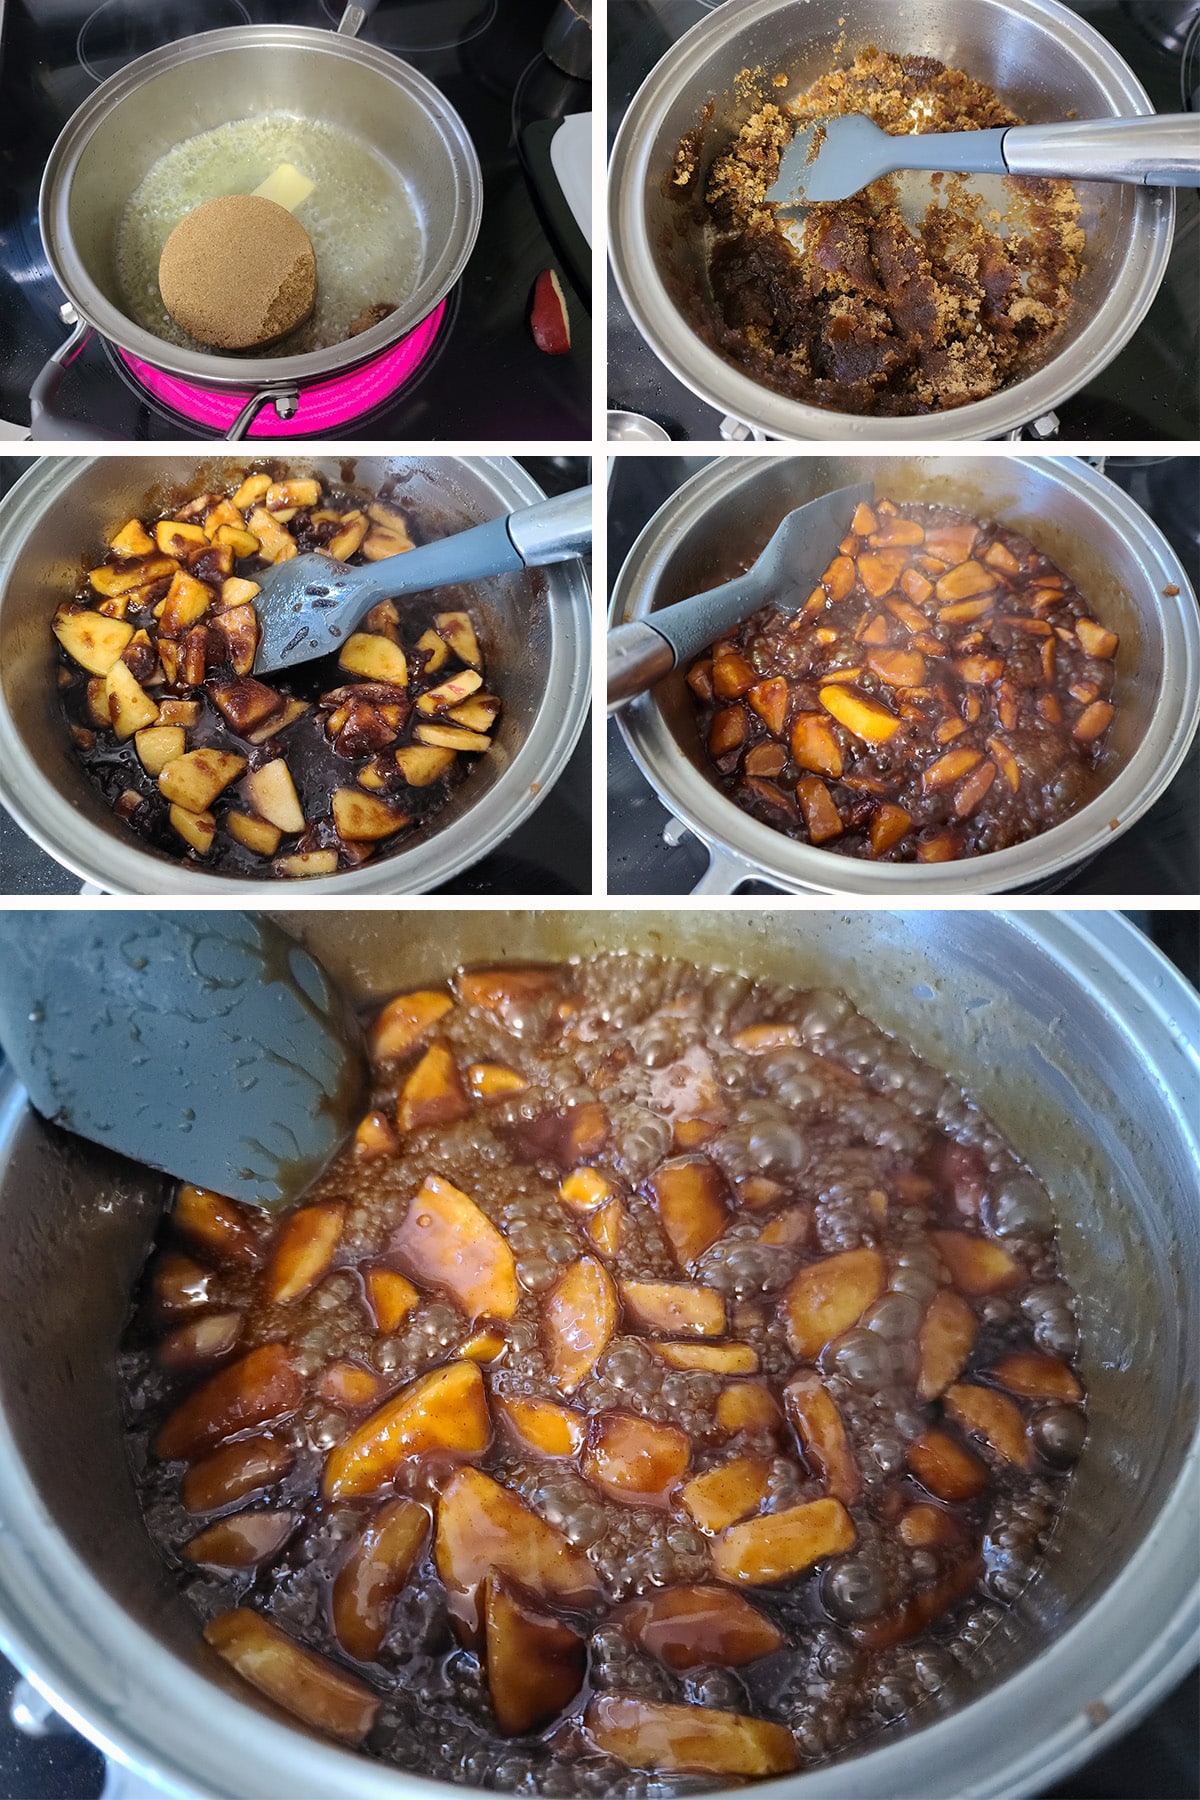 A 5 part image showing the caramel apple topping being made in a pot.